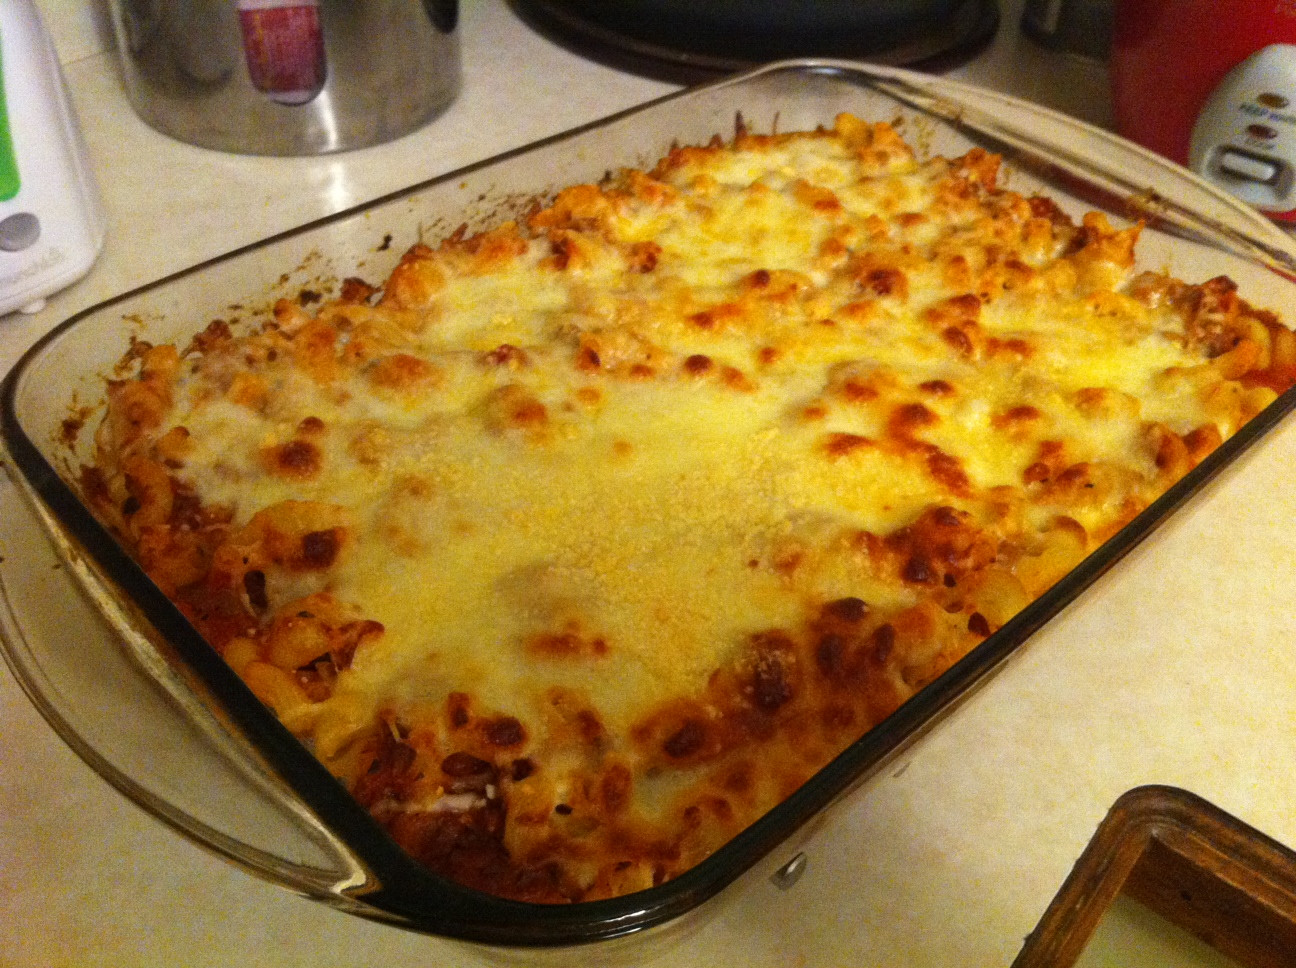 Baked Macaroni And Cheese With Spaghetti Noodles
 baked pasta with tomato sauce and mozzarella